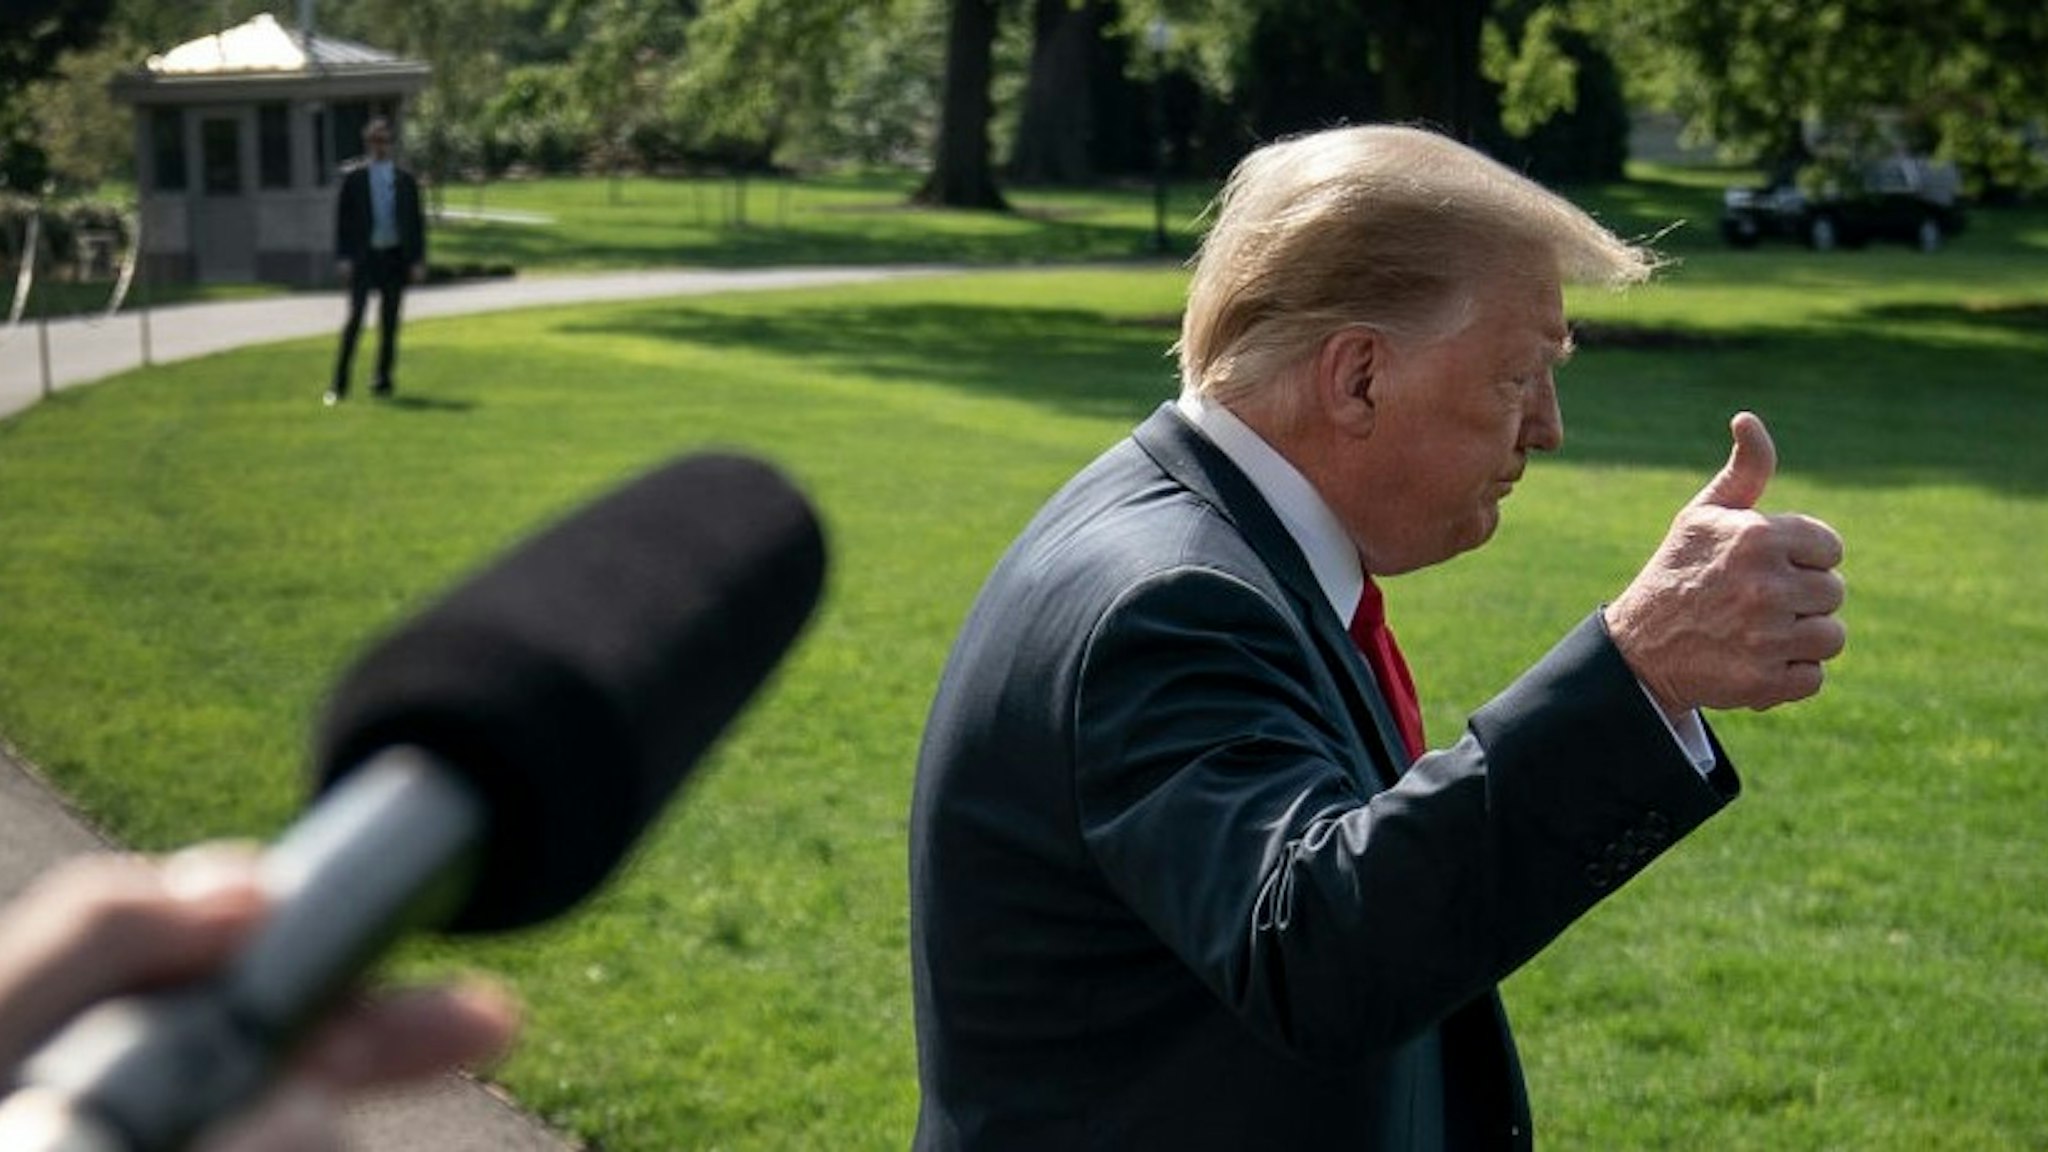 WASHINGTON, DC - JUNE 23: U.S. President Donald Trump speaks to reporters before boarding Marine One on the South Lawn of the White House on June 23, 2020 in Washington, DC. Trump is traveling to Arizona where he will tour border-wall-construction operations in Yuma, later speaking to a conservative advocacy group in Phoenix. (Photo by